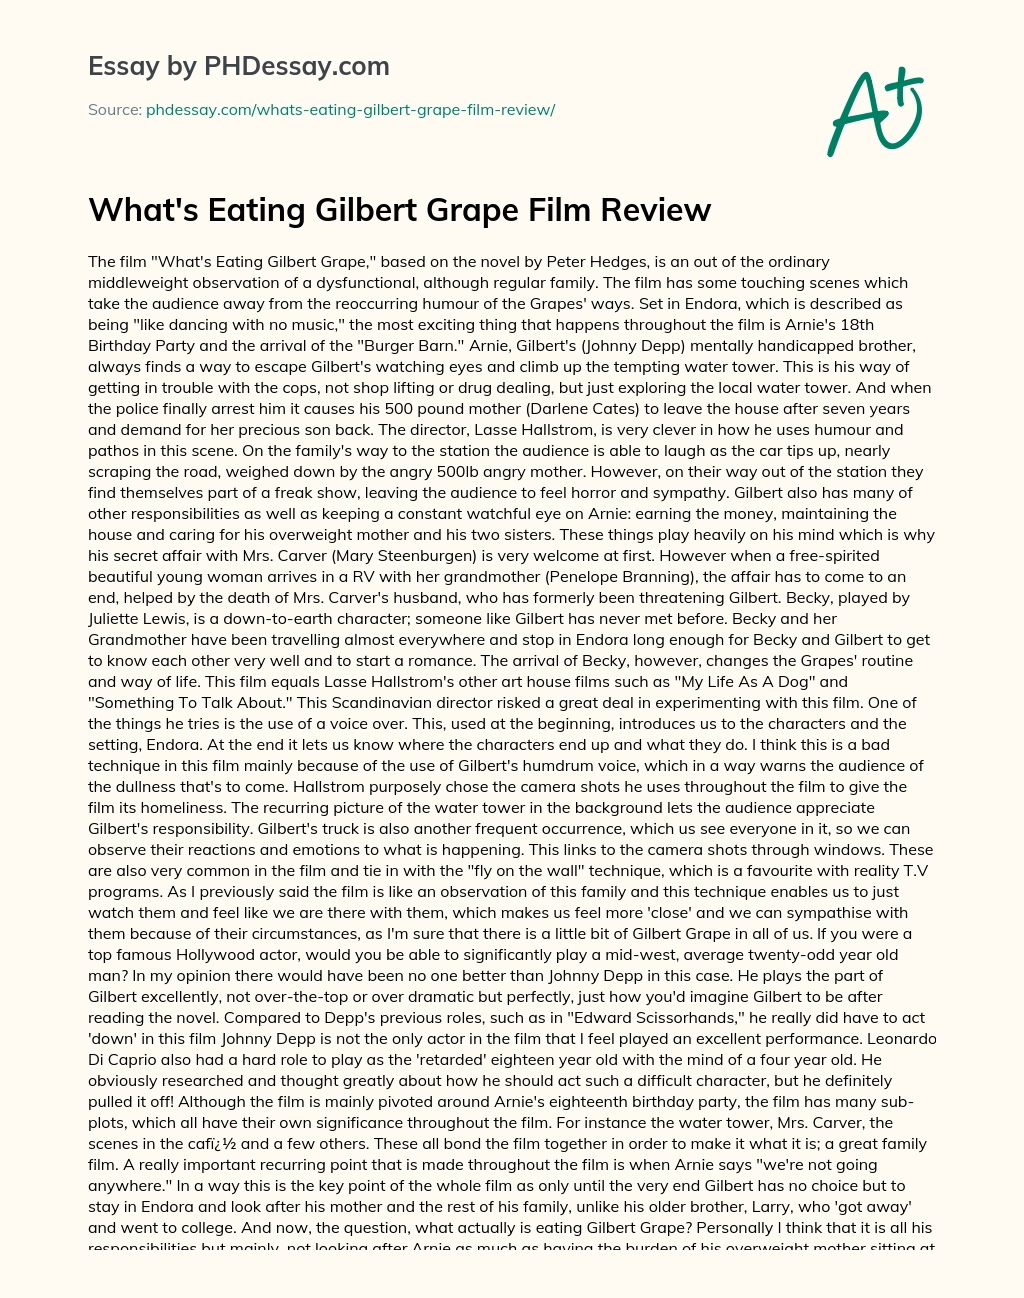 What’s Eating Gilbert Grape Film Review essay